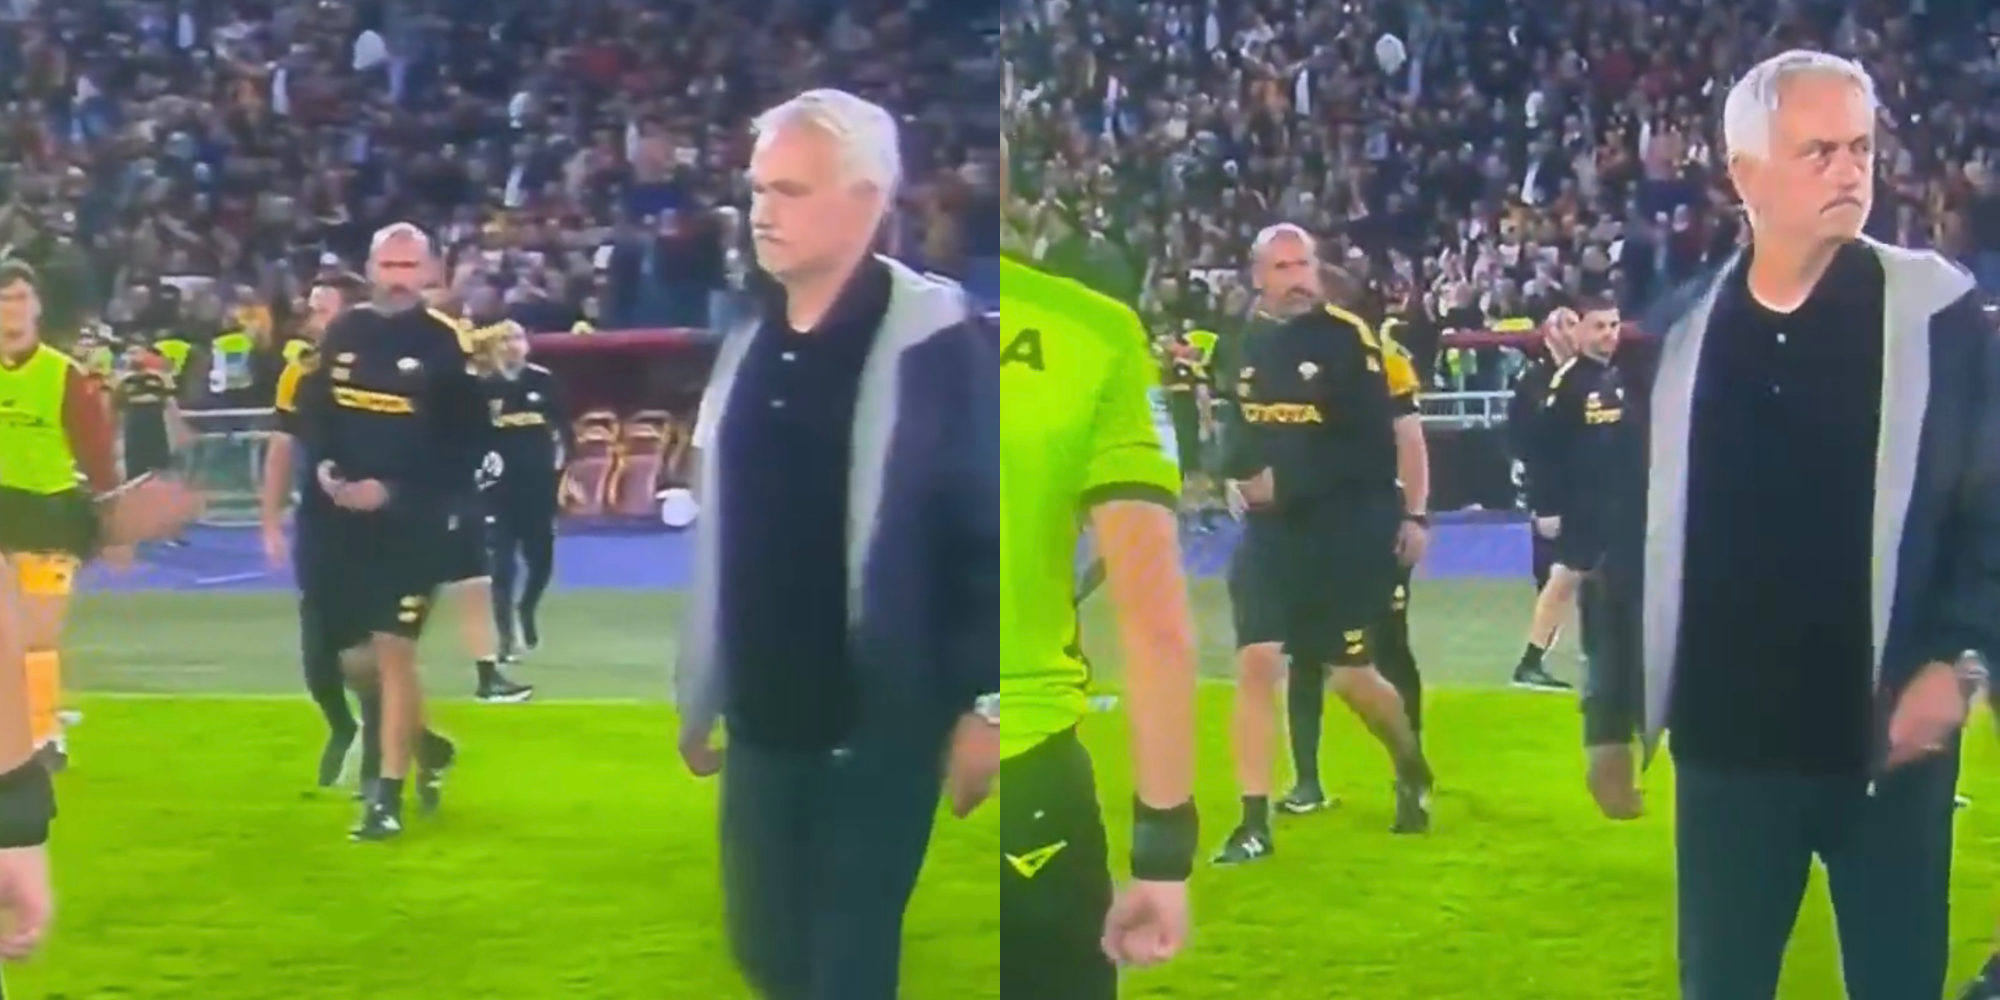 Mourinho avoids red card during fiery altercation